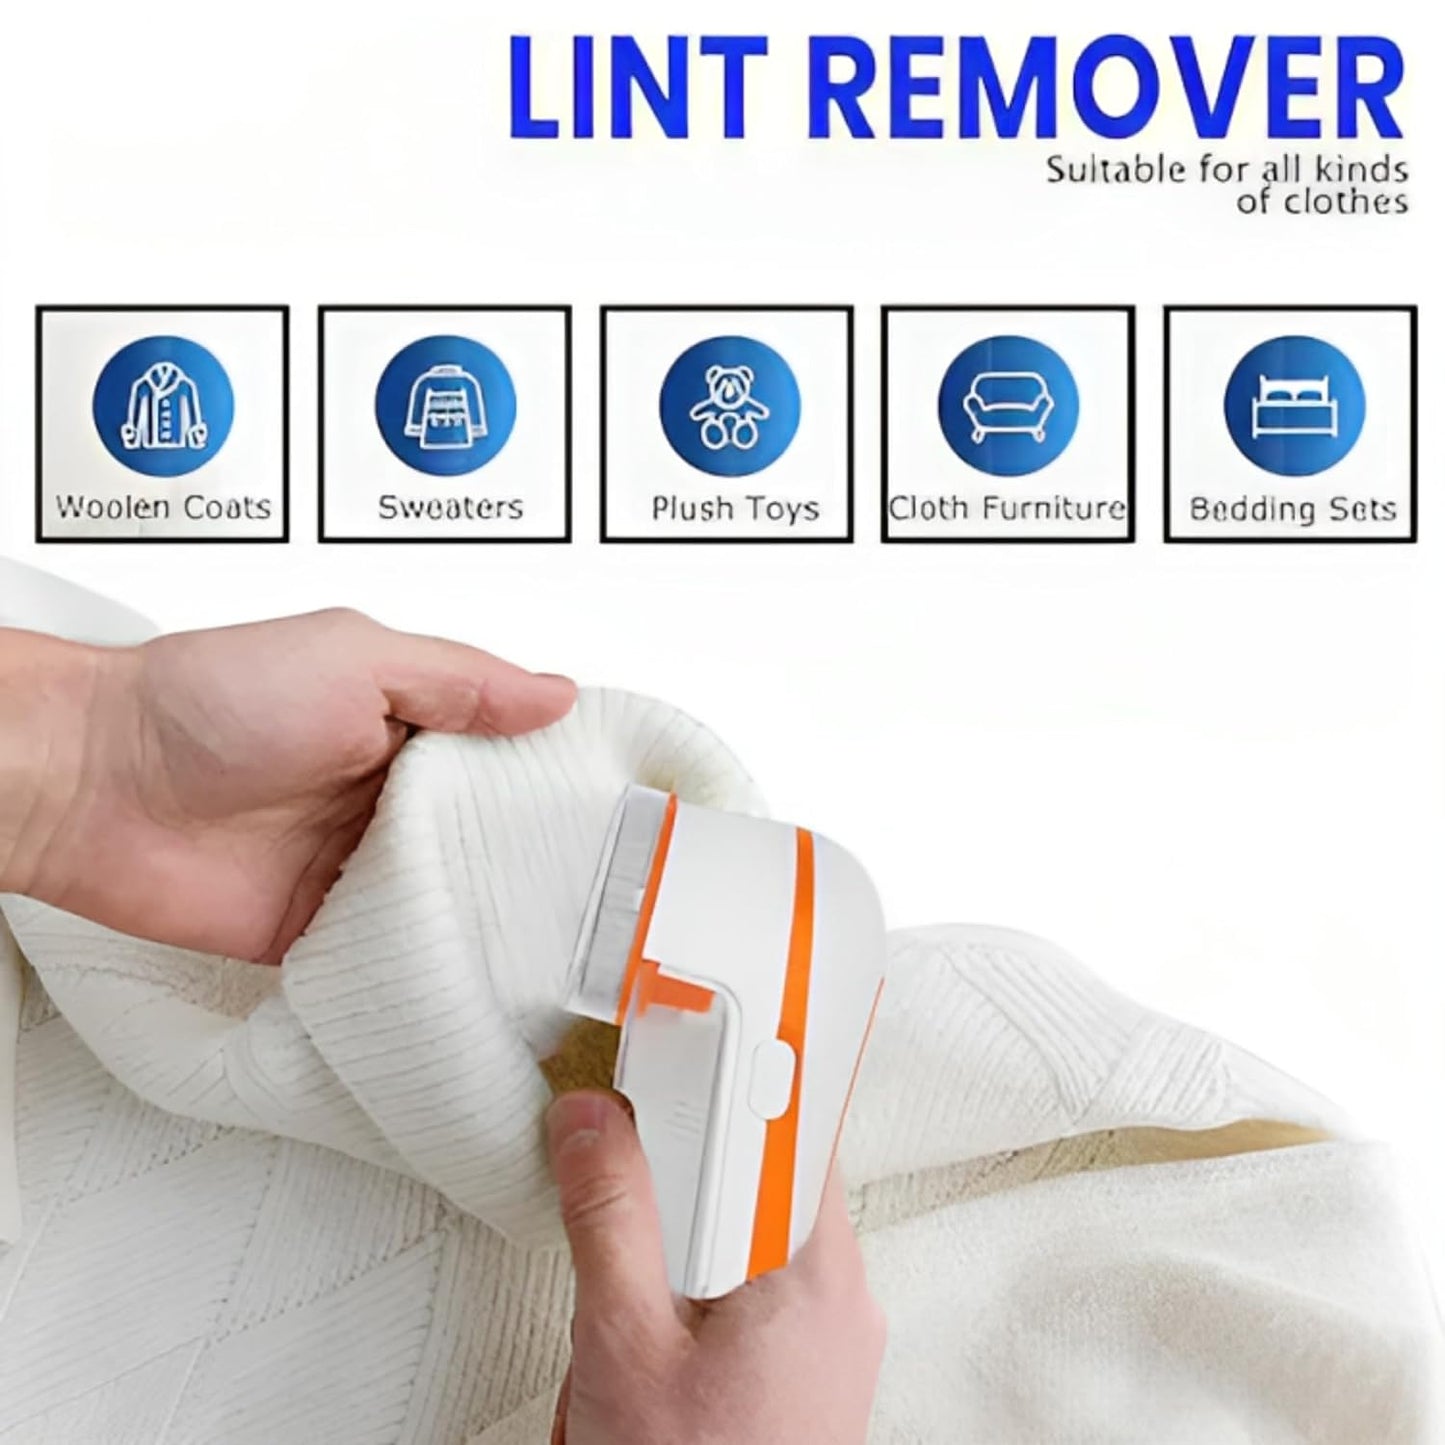 Lint Remover for Clothes